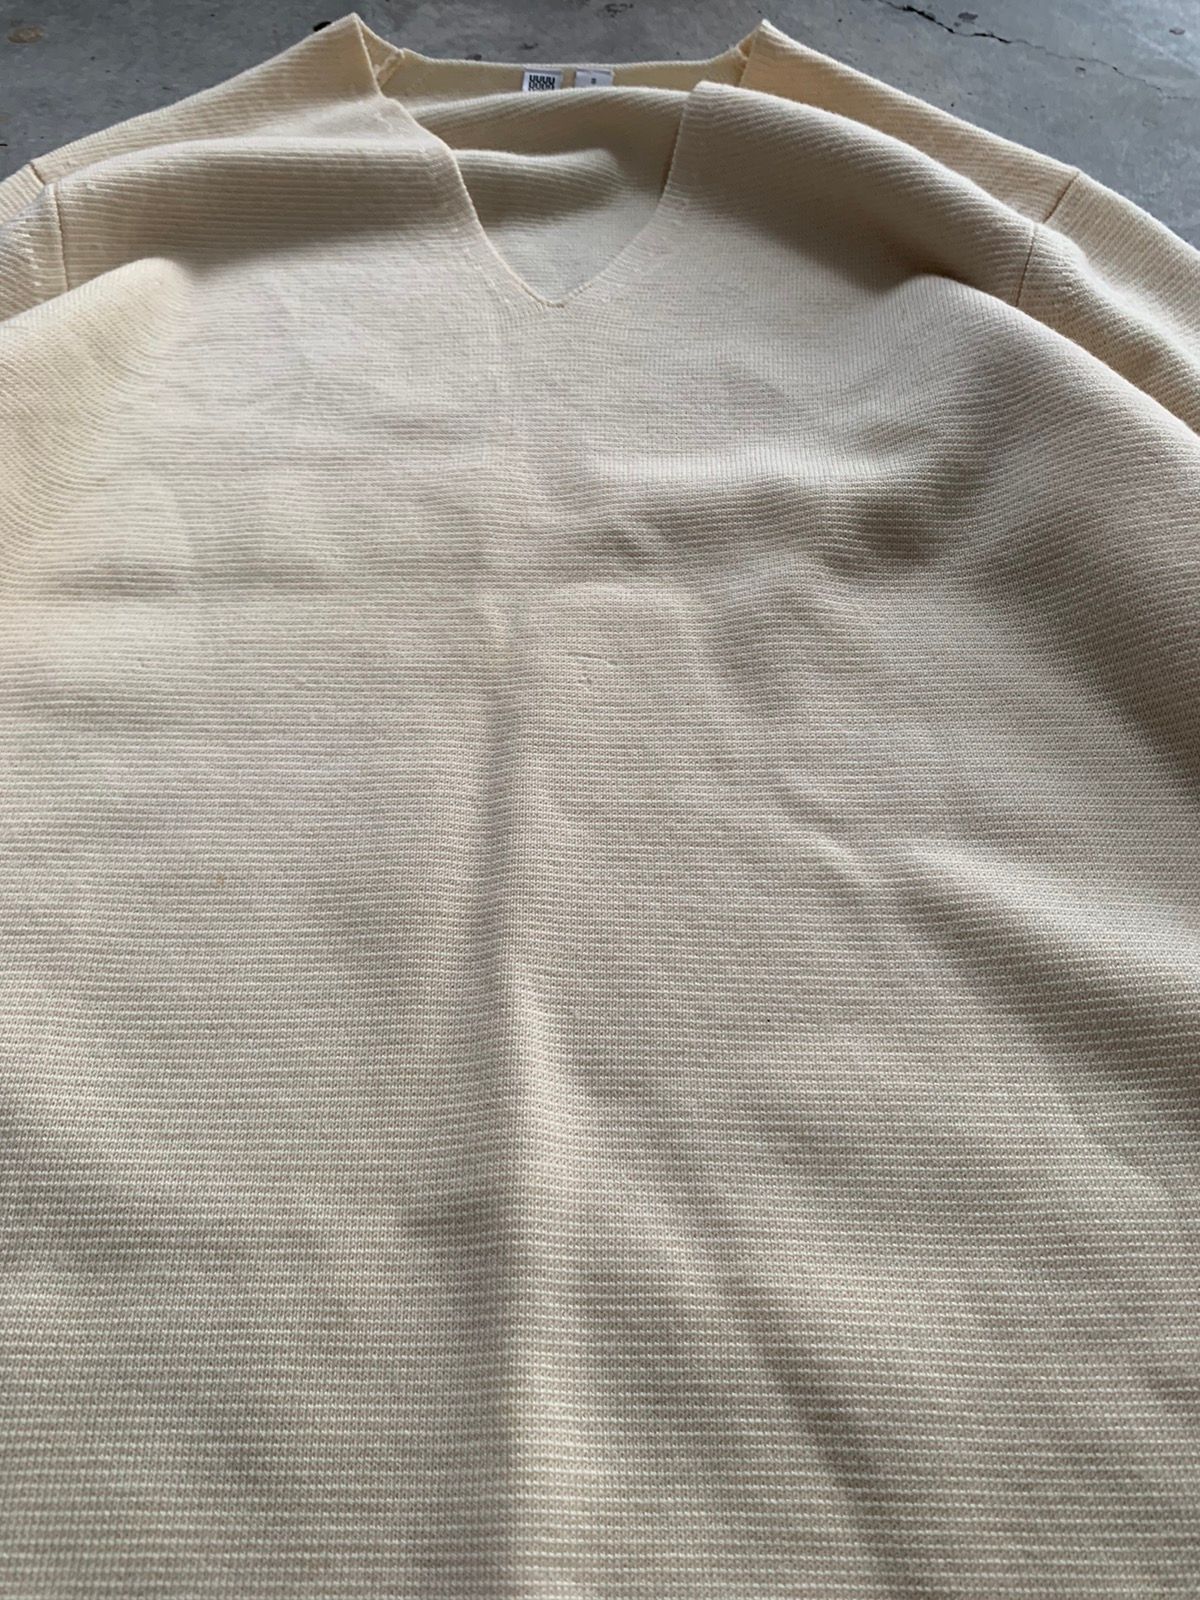 Uniqlo Lemaire Wool Sweater V neck - 3